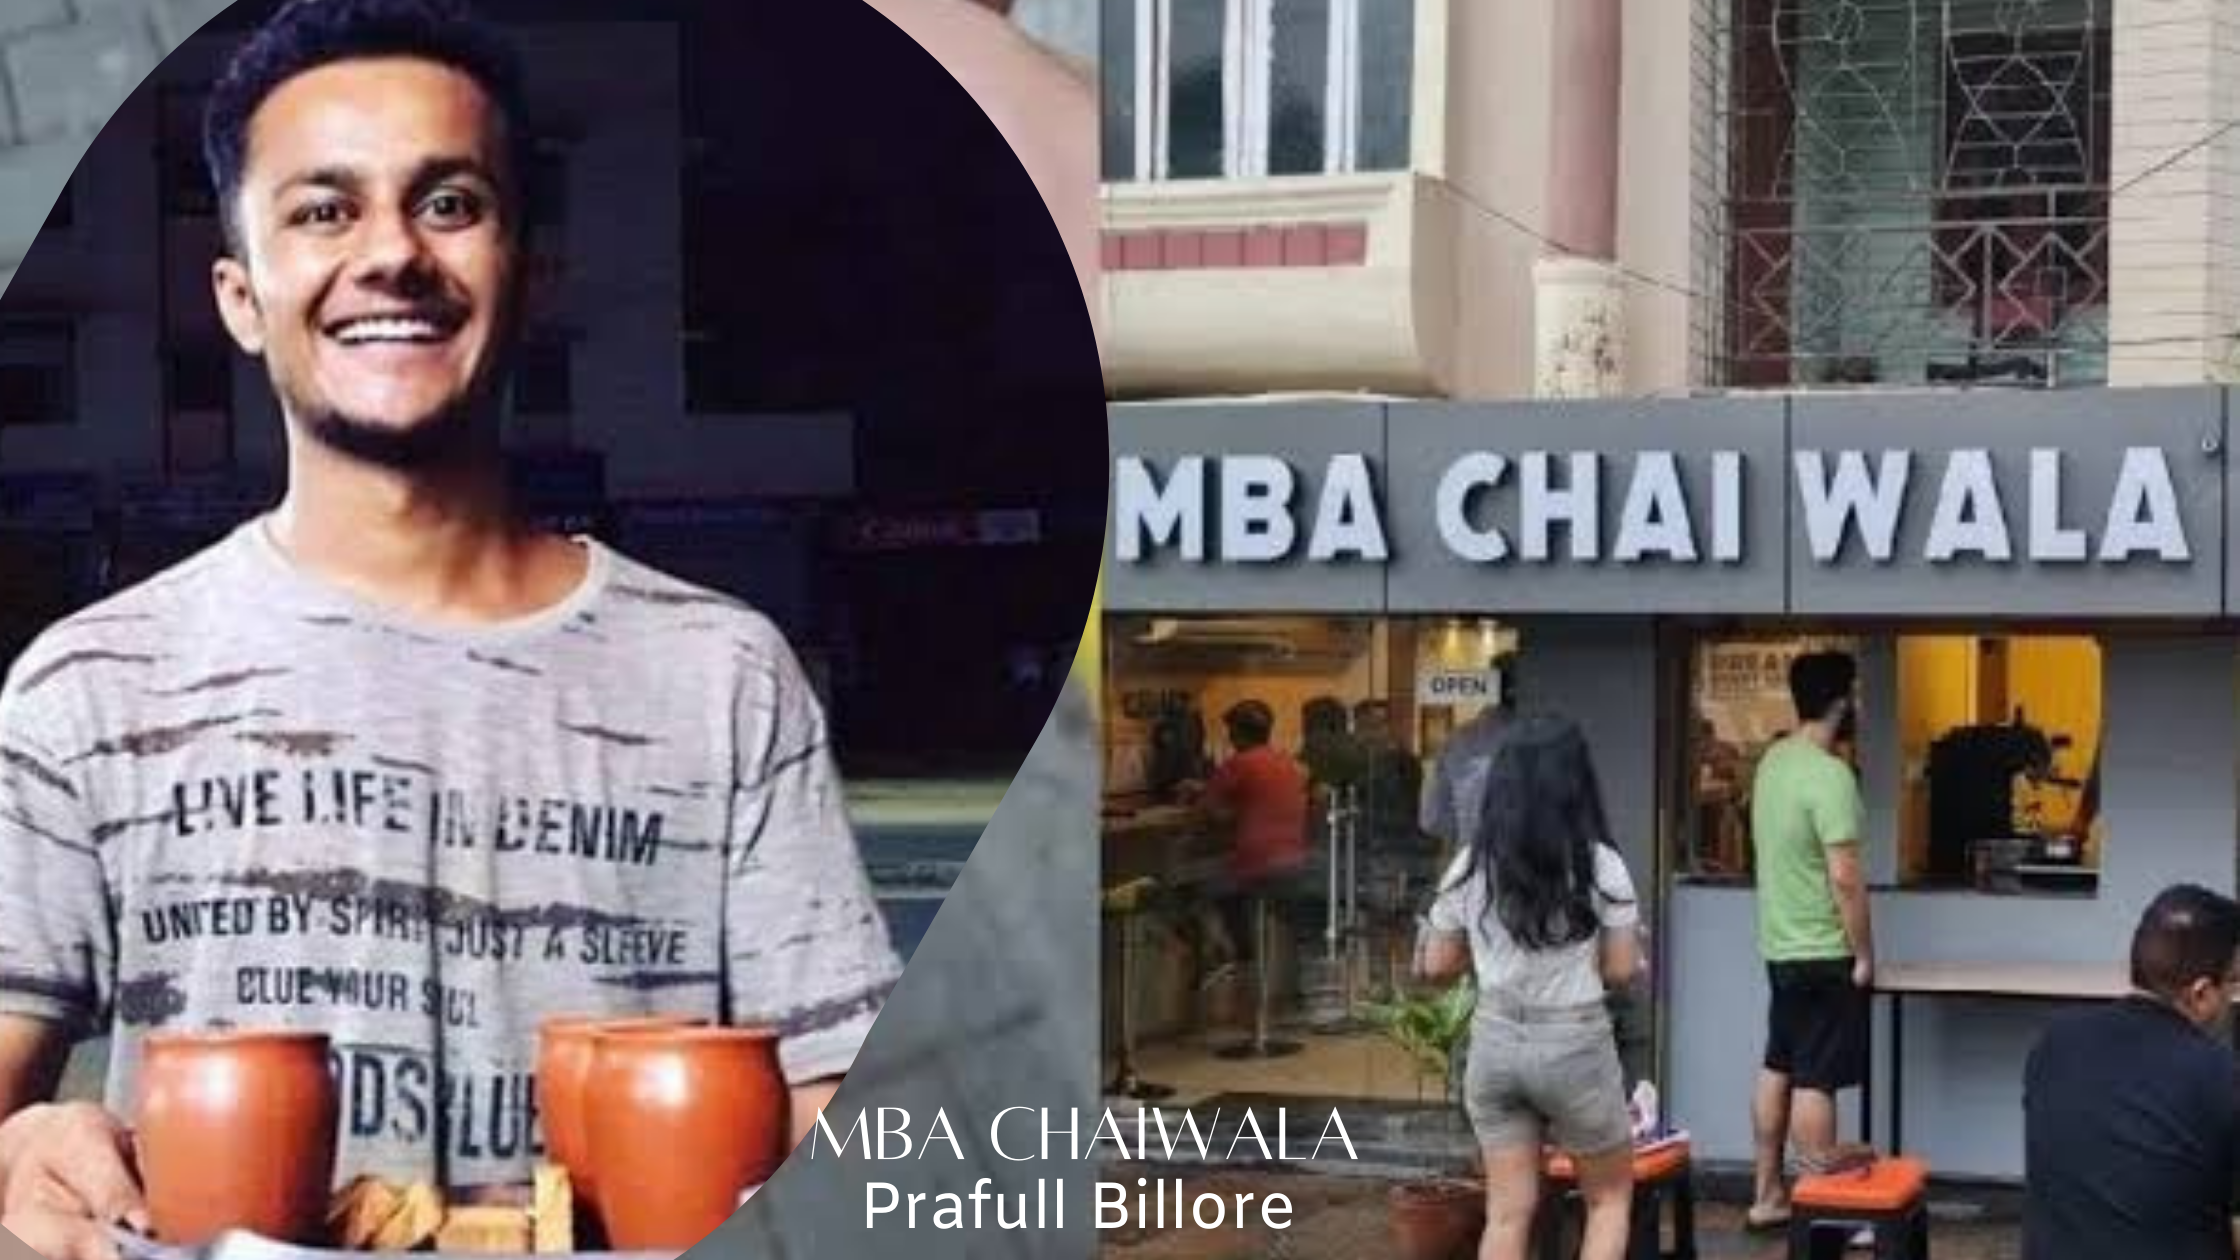 How to build up a successful business – story of MBA Chaiwala.